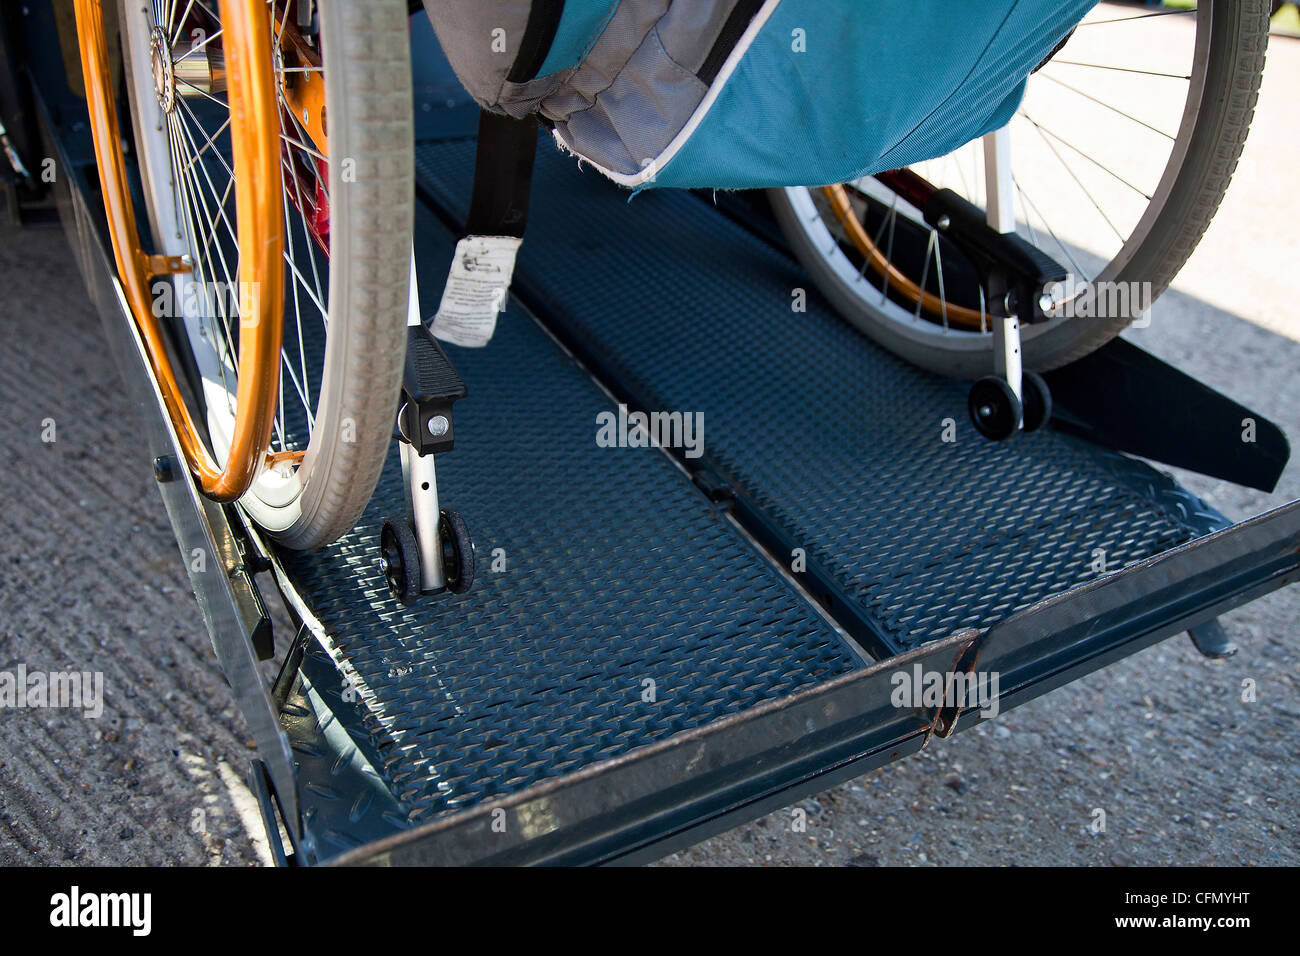 Wheelchair being raised up on tail lift of bus Stock Photo